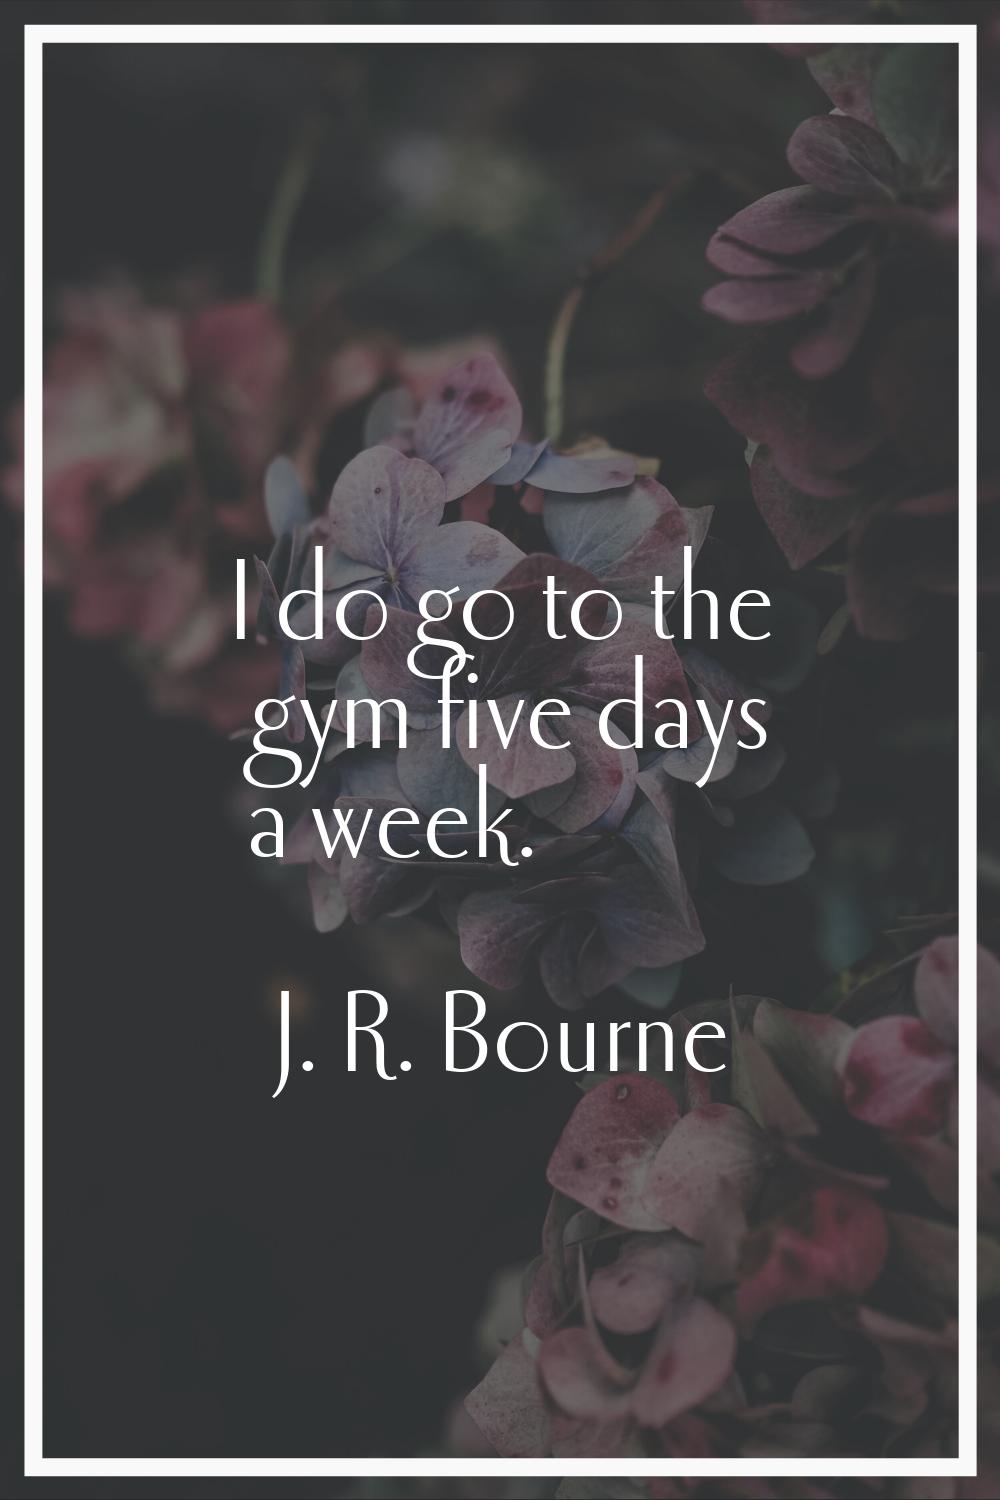 I do go to the gym five days a week.